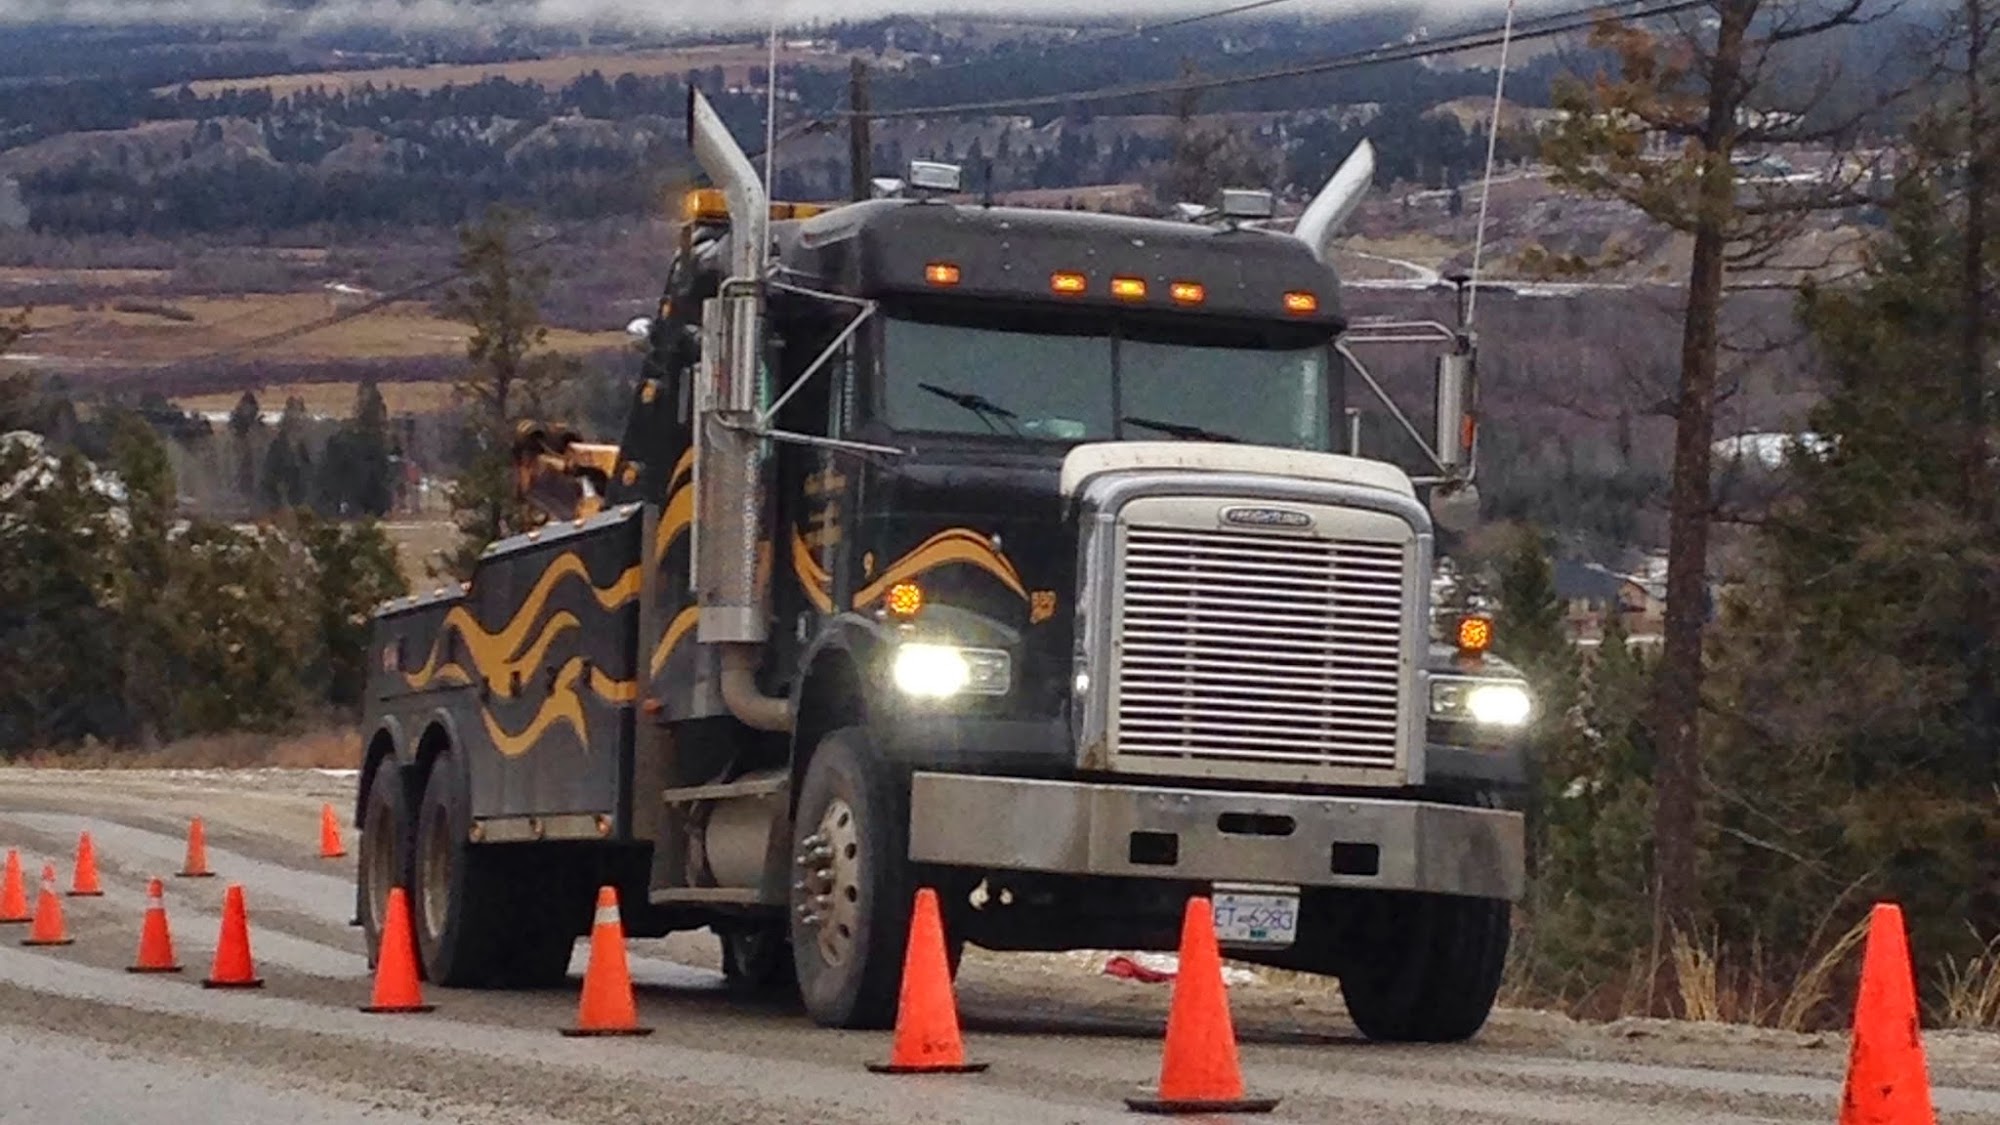 Club Towing & Invermere Traffic Control